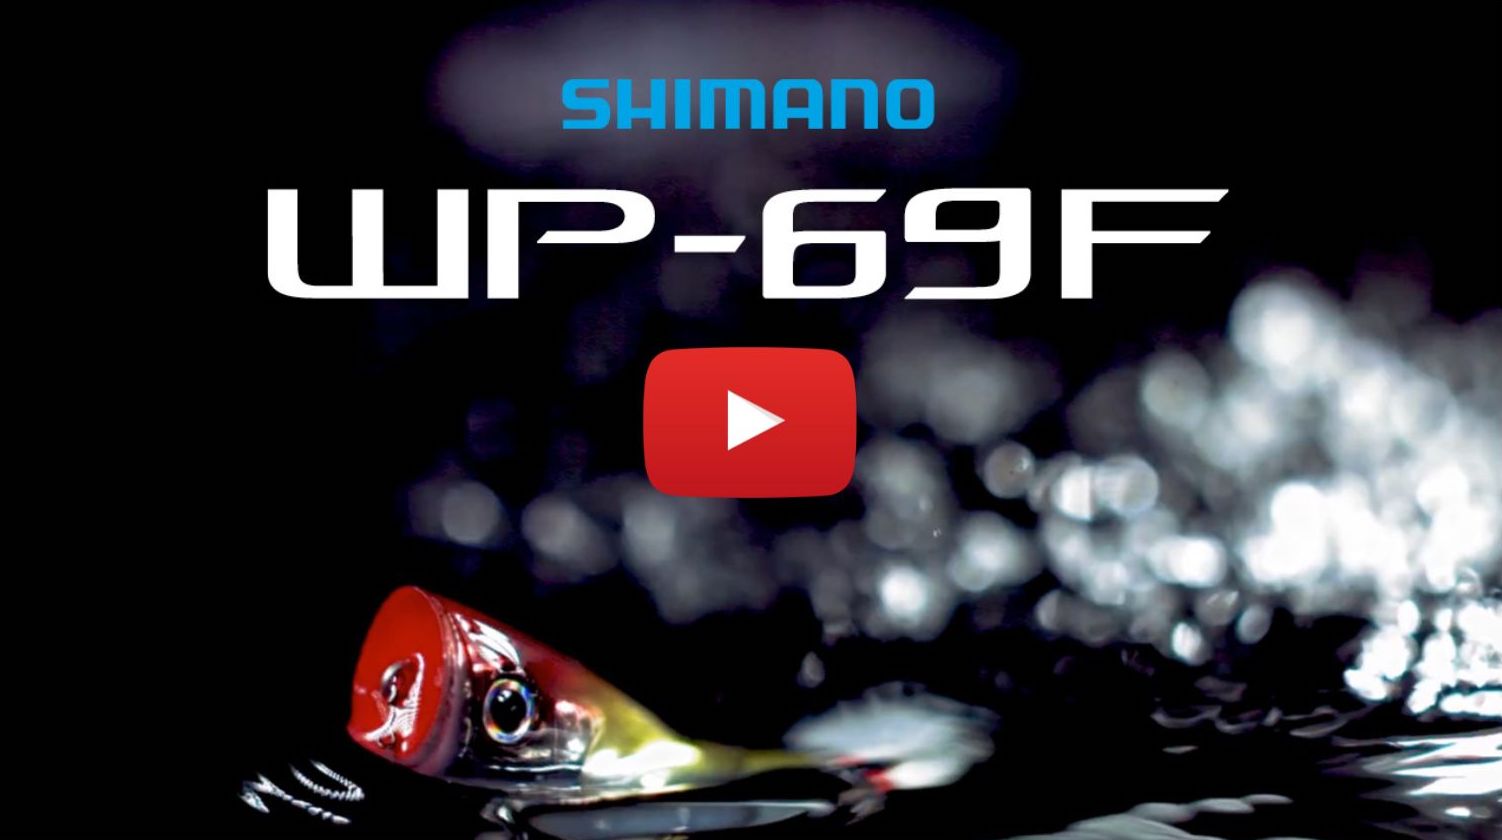 Shimano World Pop 69F FLASH BOOST Delivers Innovation to Topwater Fishing